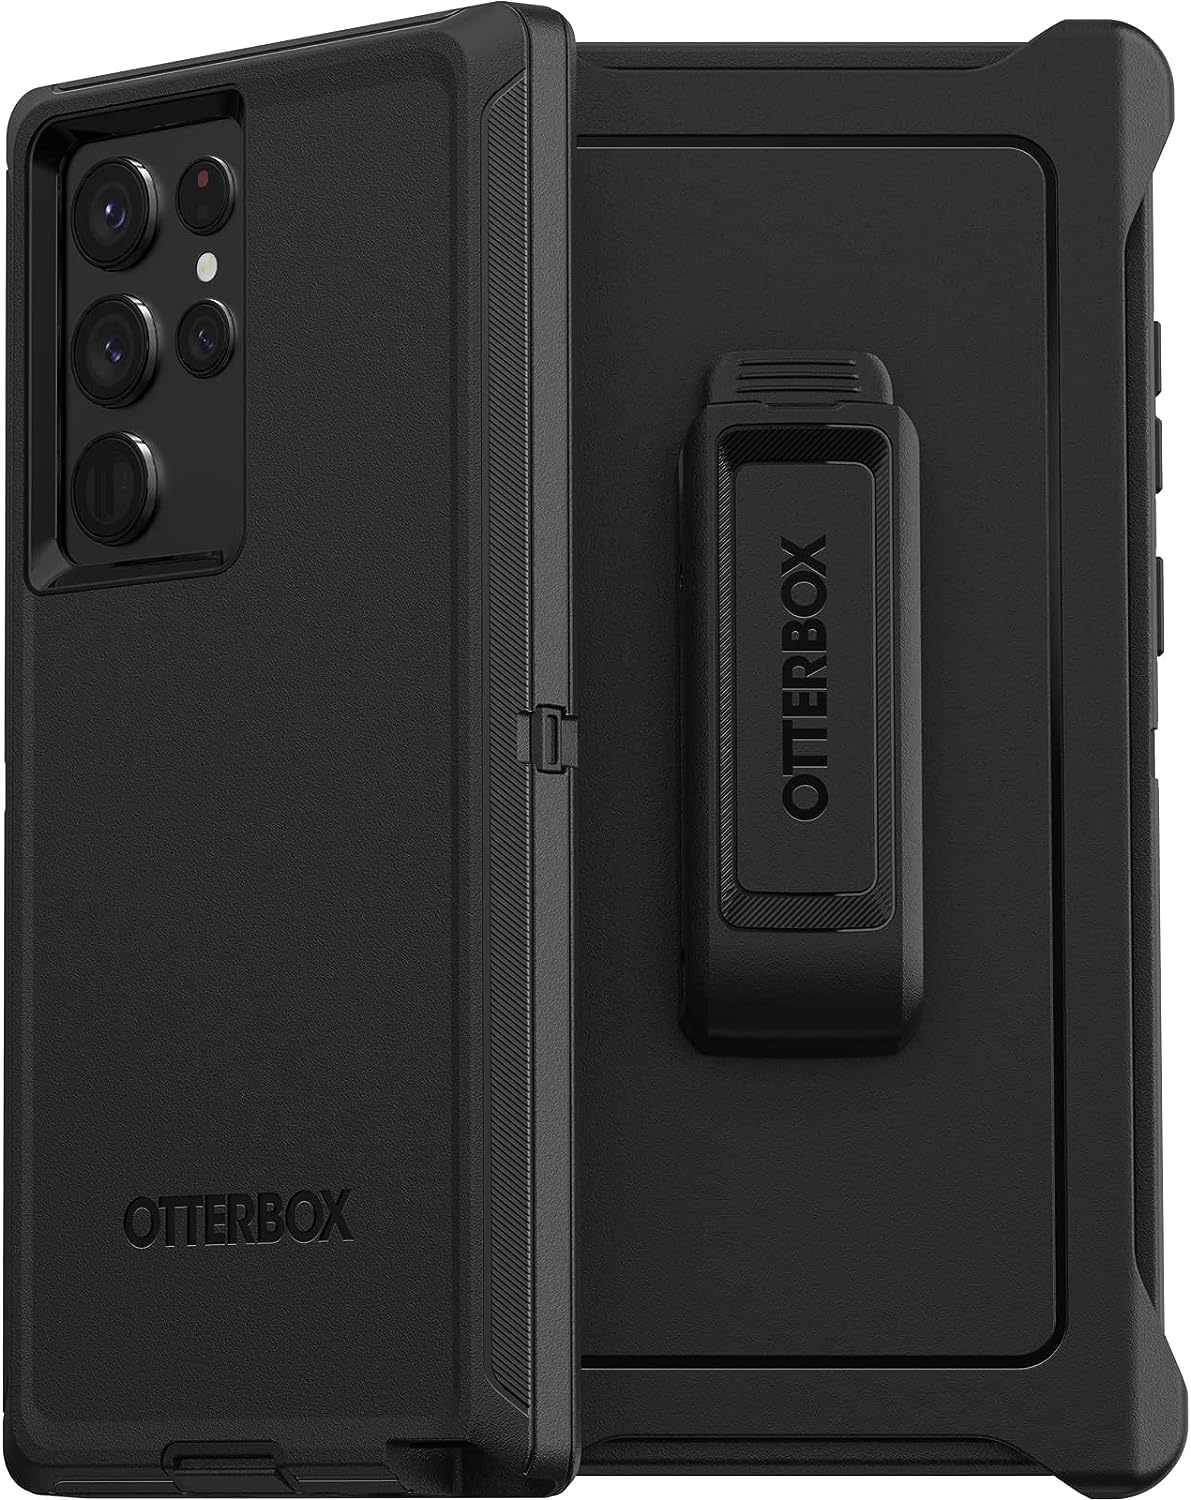 OtterBox DEFENDER SERIES Case for Samsung Galaxy S22 Ultra - Black (New)